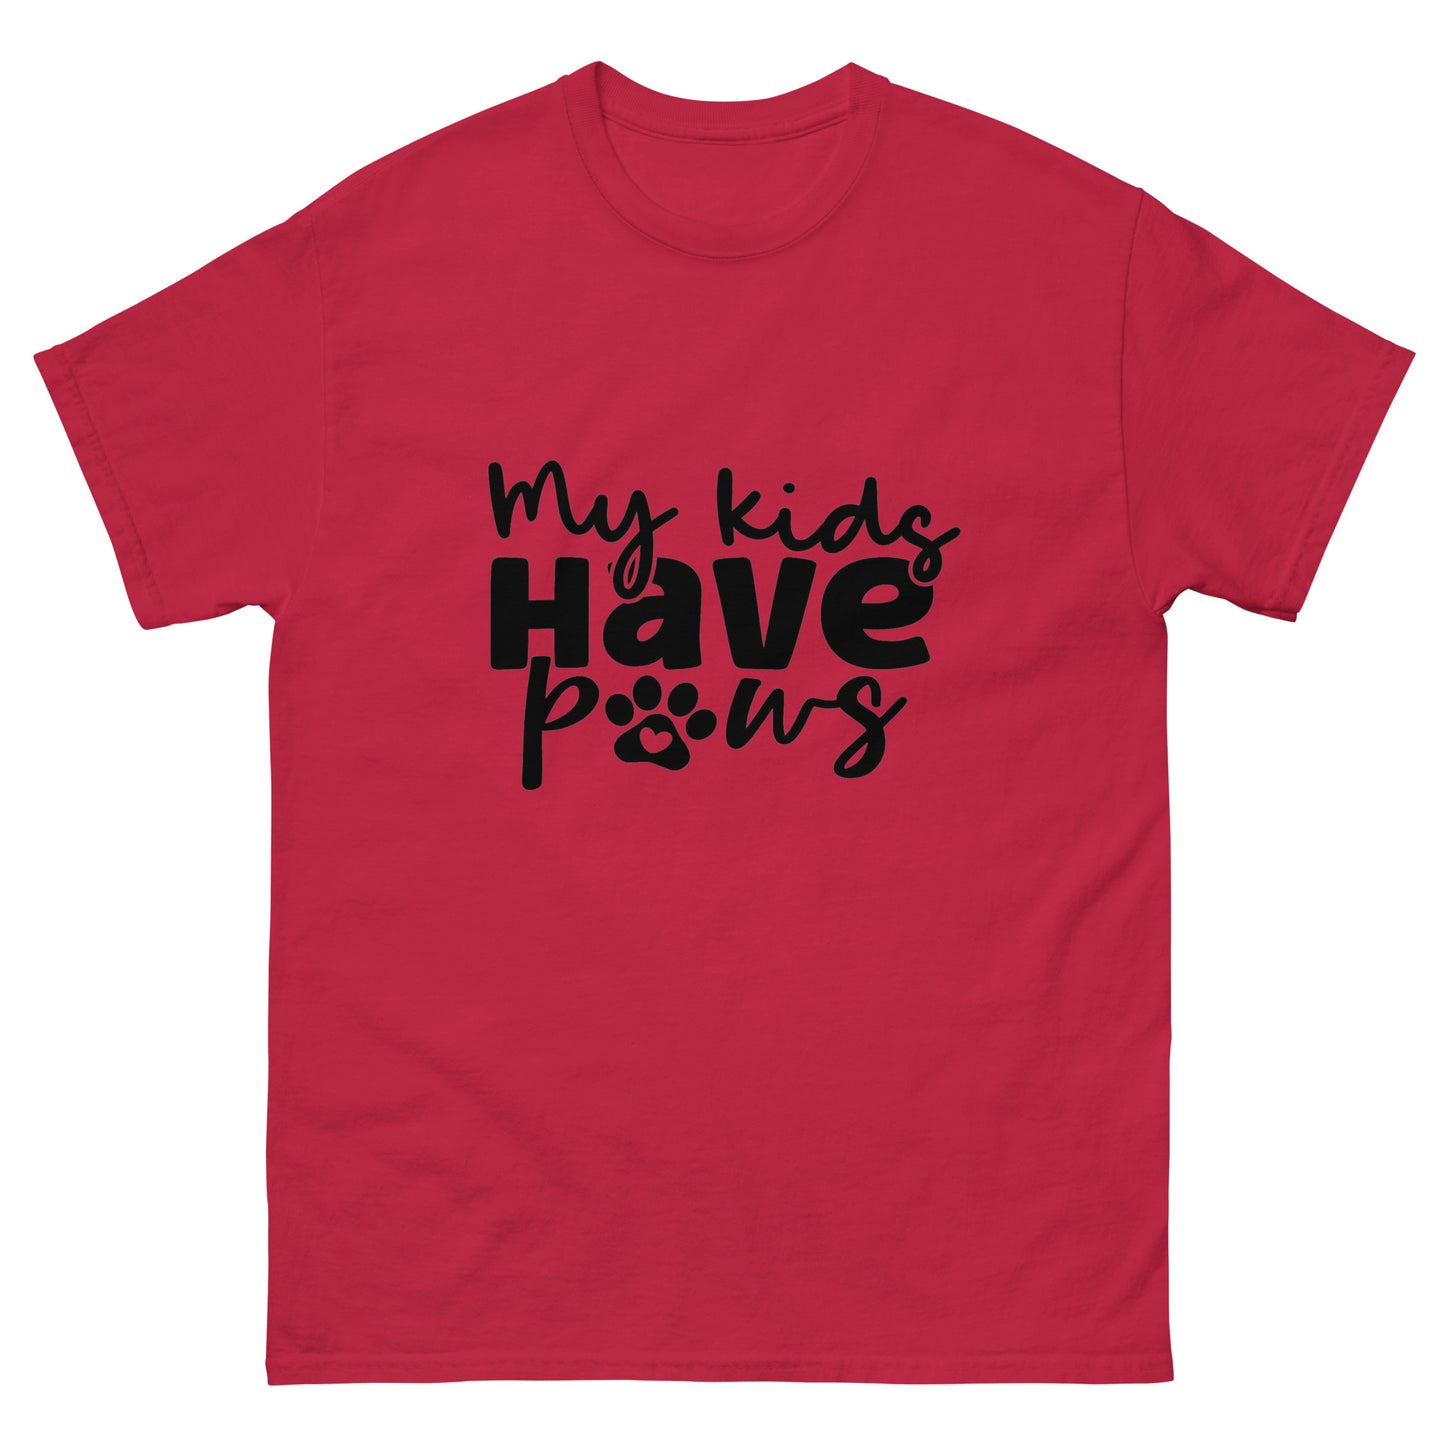 My Kids Have Paws - classic tee